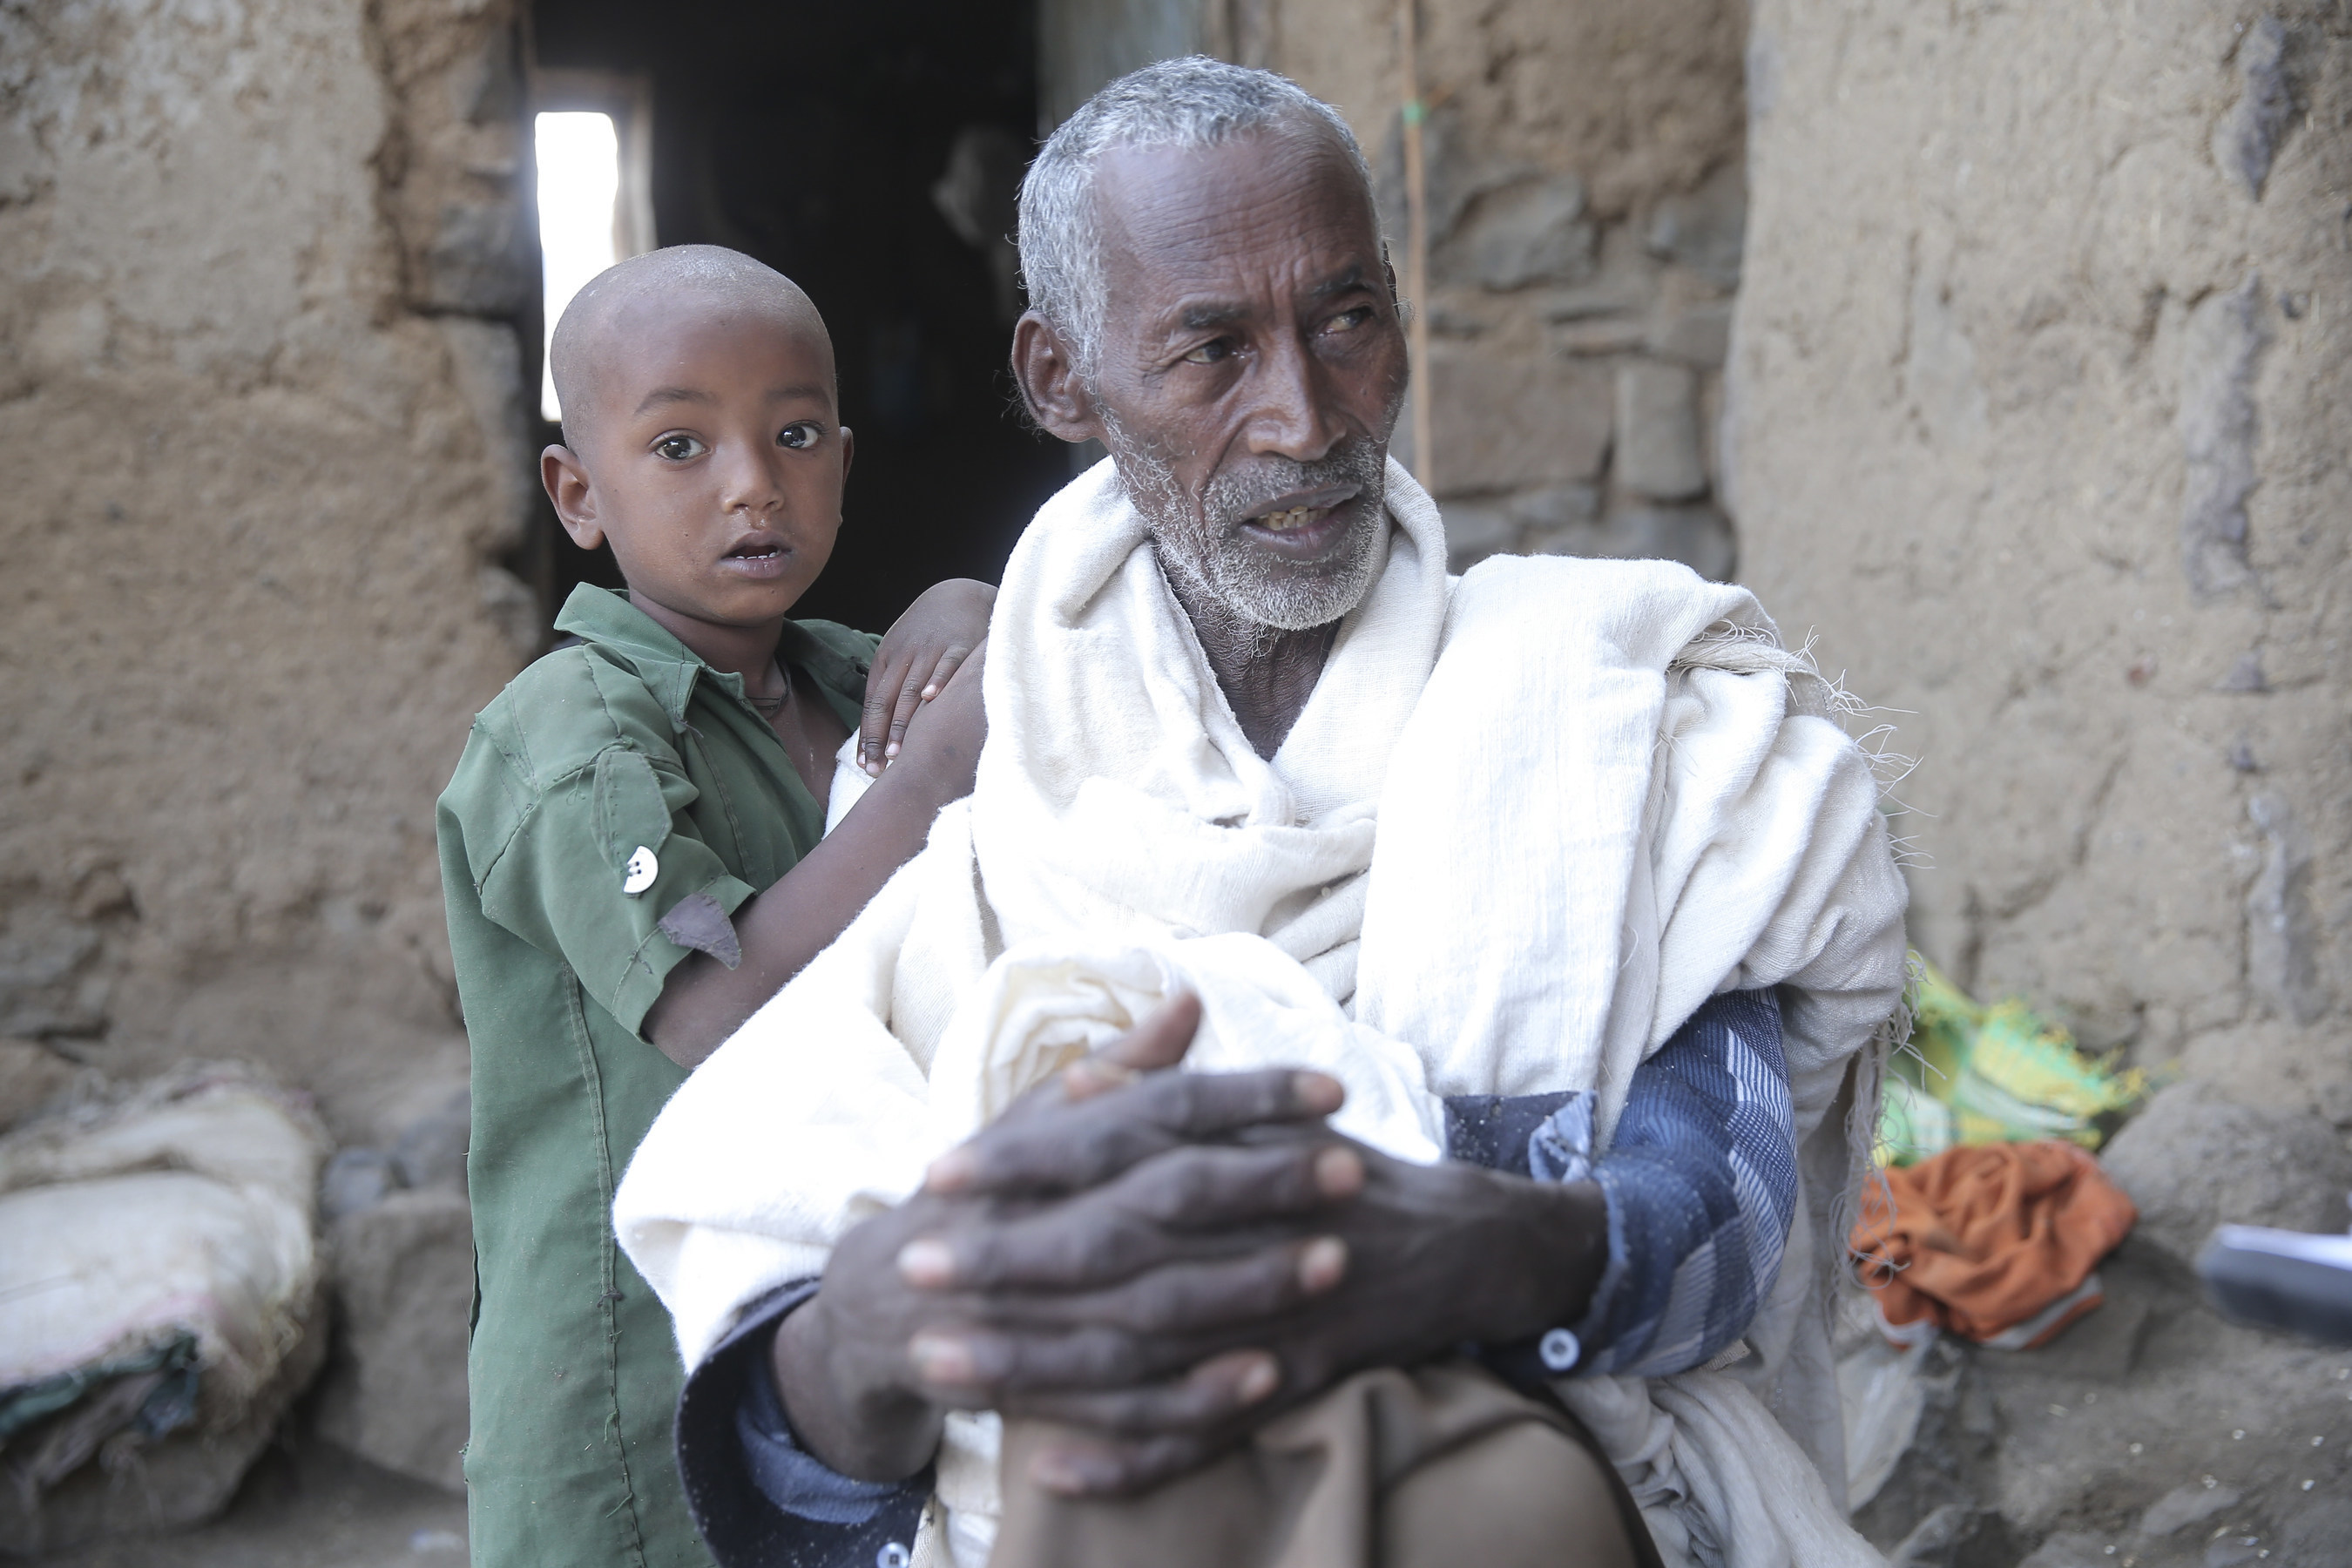 Birhanu, 73, lives in the Amhara Region of Ethiopia. He is married with eight kids. He is a farmer who produces millet and teff. Due to the drought, he has not harvested for some time, and in addition, two of his oxen have died and he was obliged to sell three others. Now he has only one ox and a calf, as well as eight sheep, which are in good condition. The millet farm is completely destroyed and doesn't even have seeds for the next cultivation.